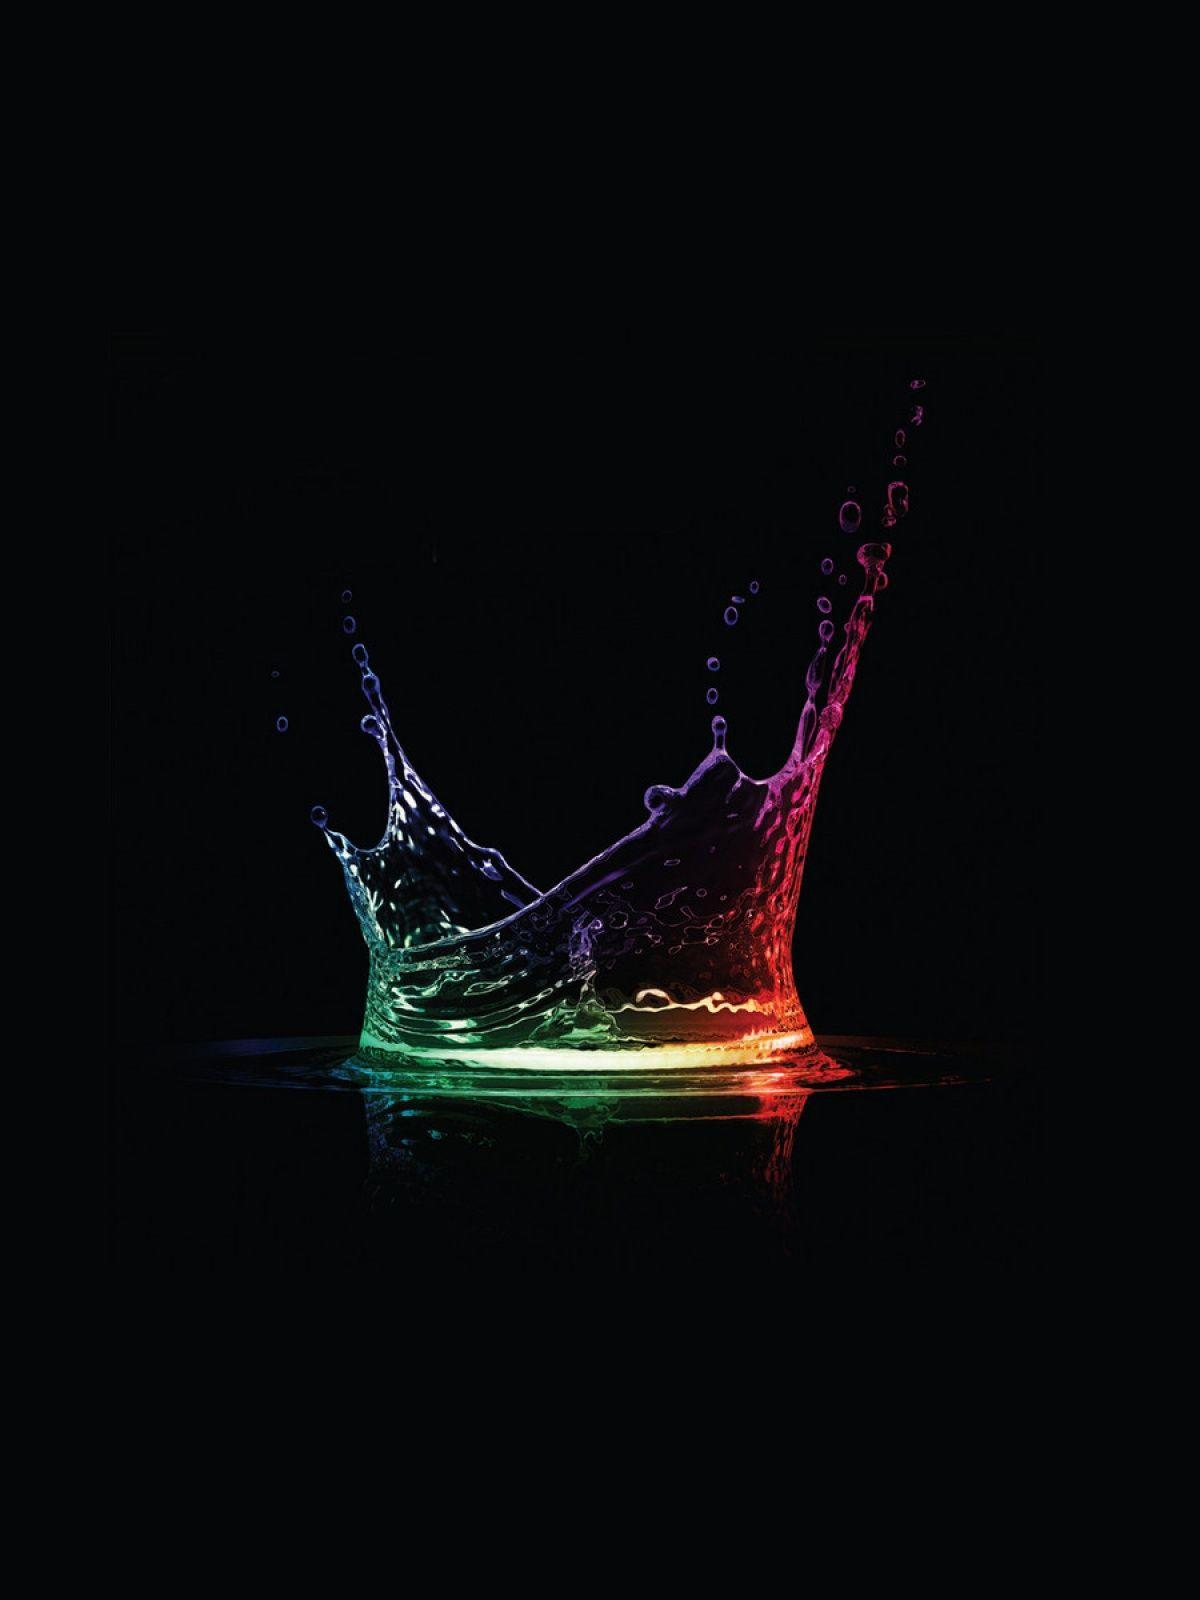 Rainbow Water Drop Black Android Wallpaper free download